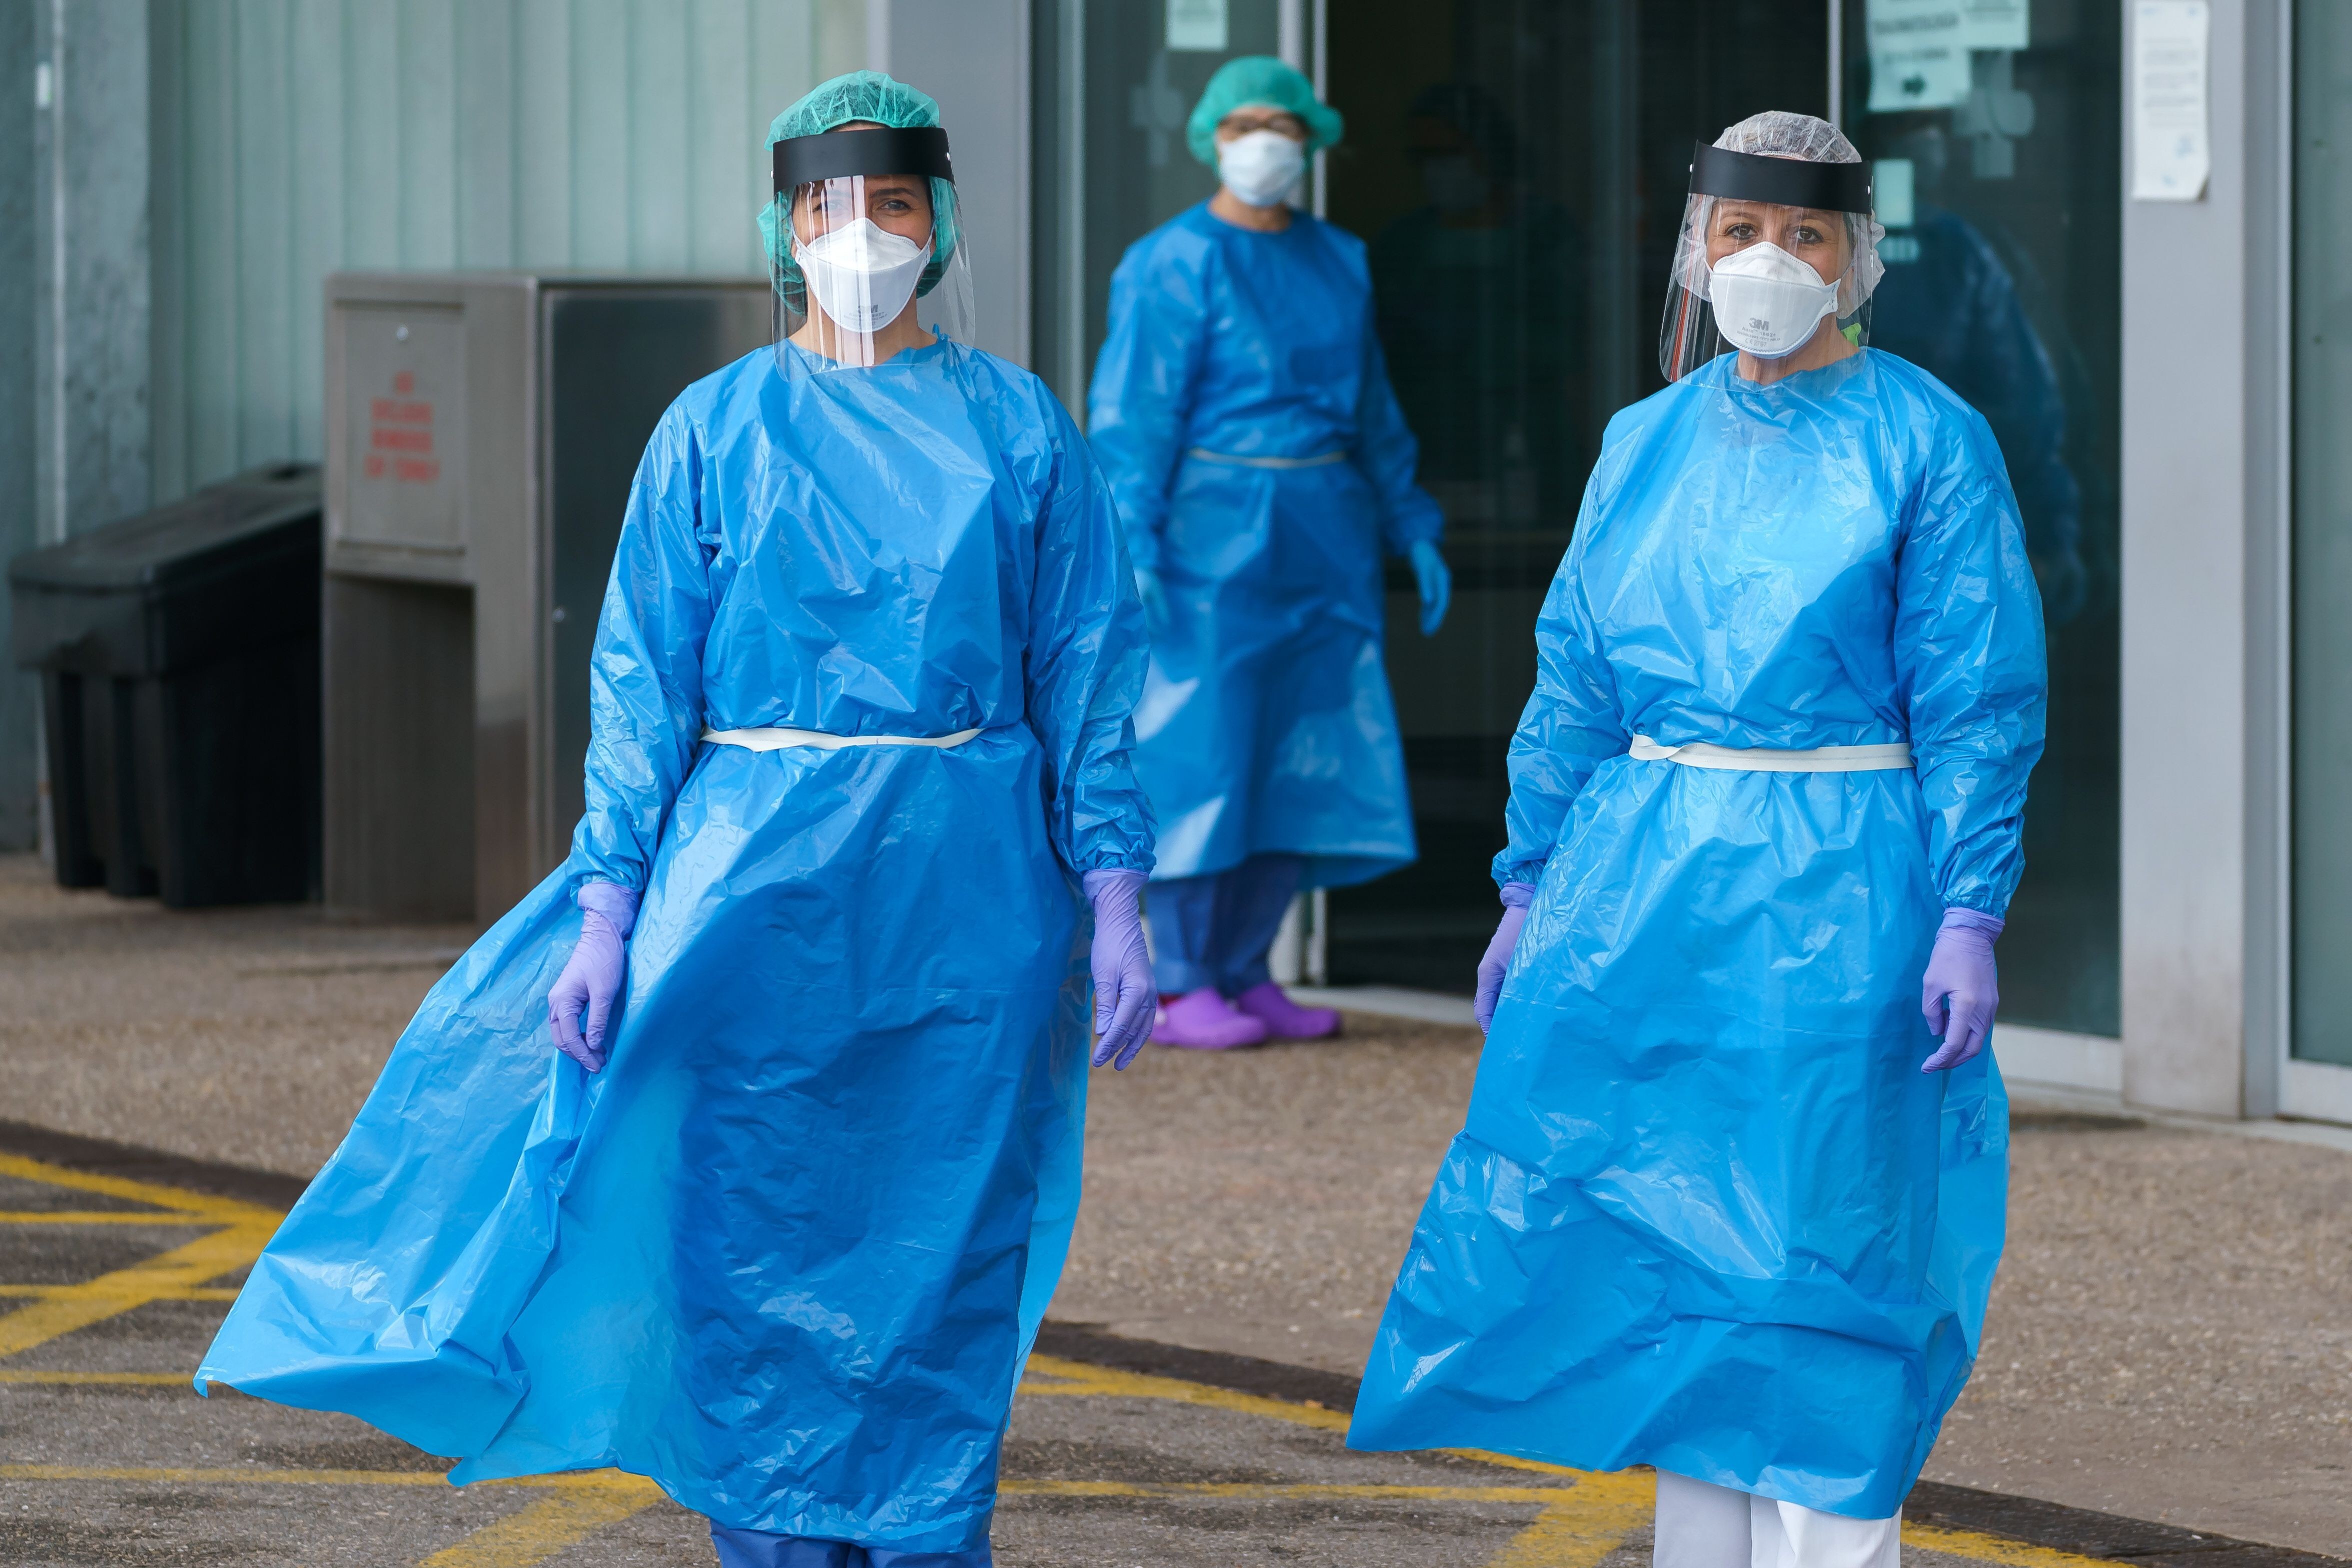 Health workers in protective gear outside an emergency entrance to a hospital in northern Spain. Photo: AFP